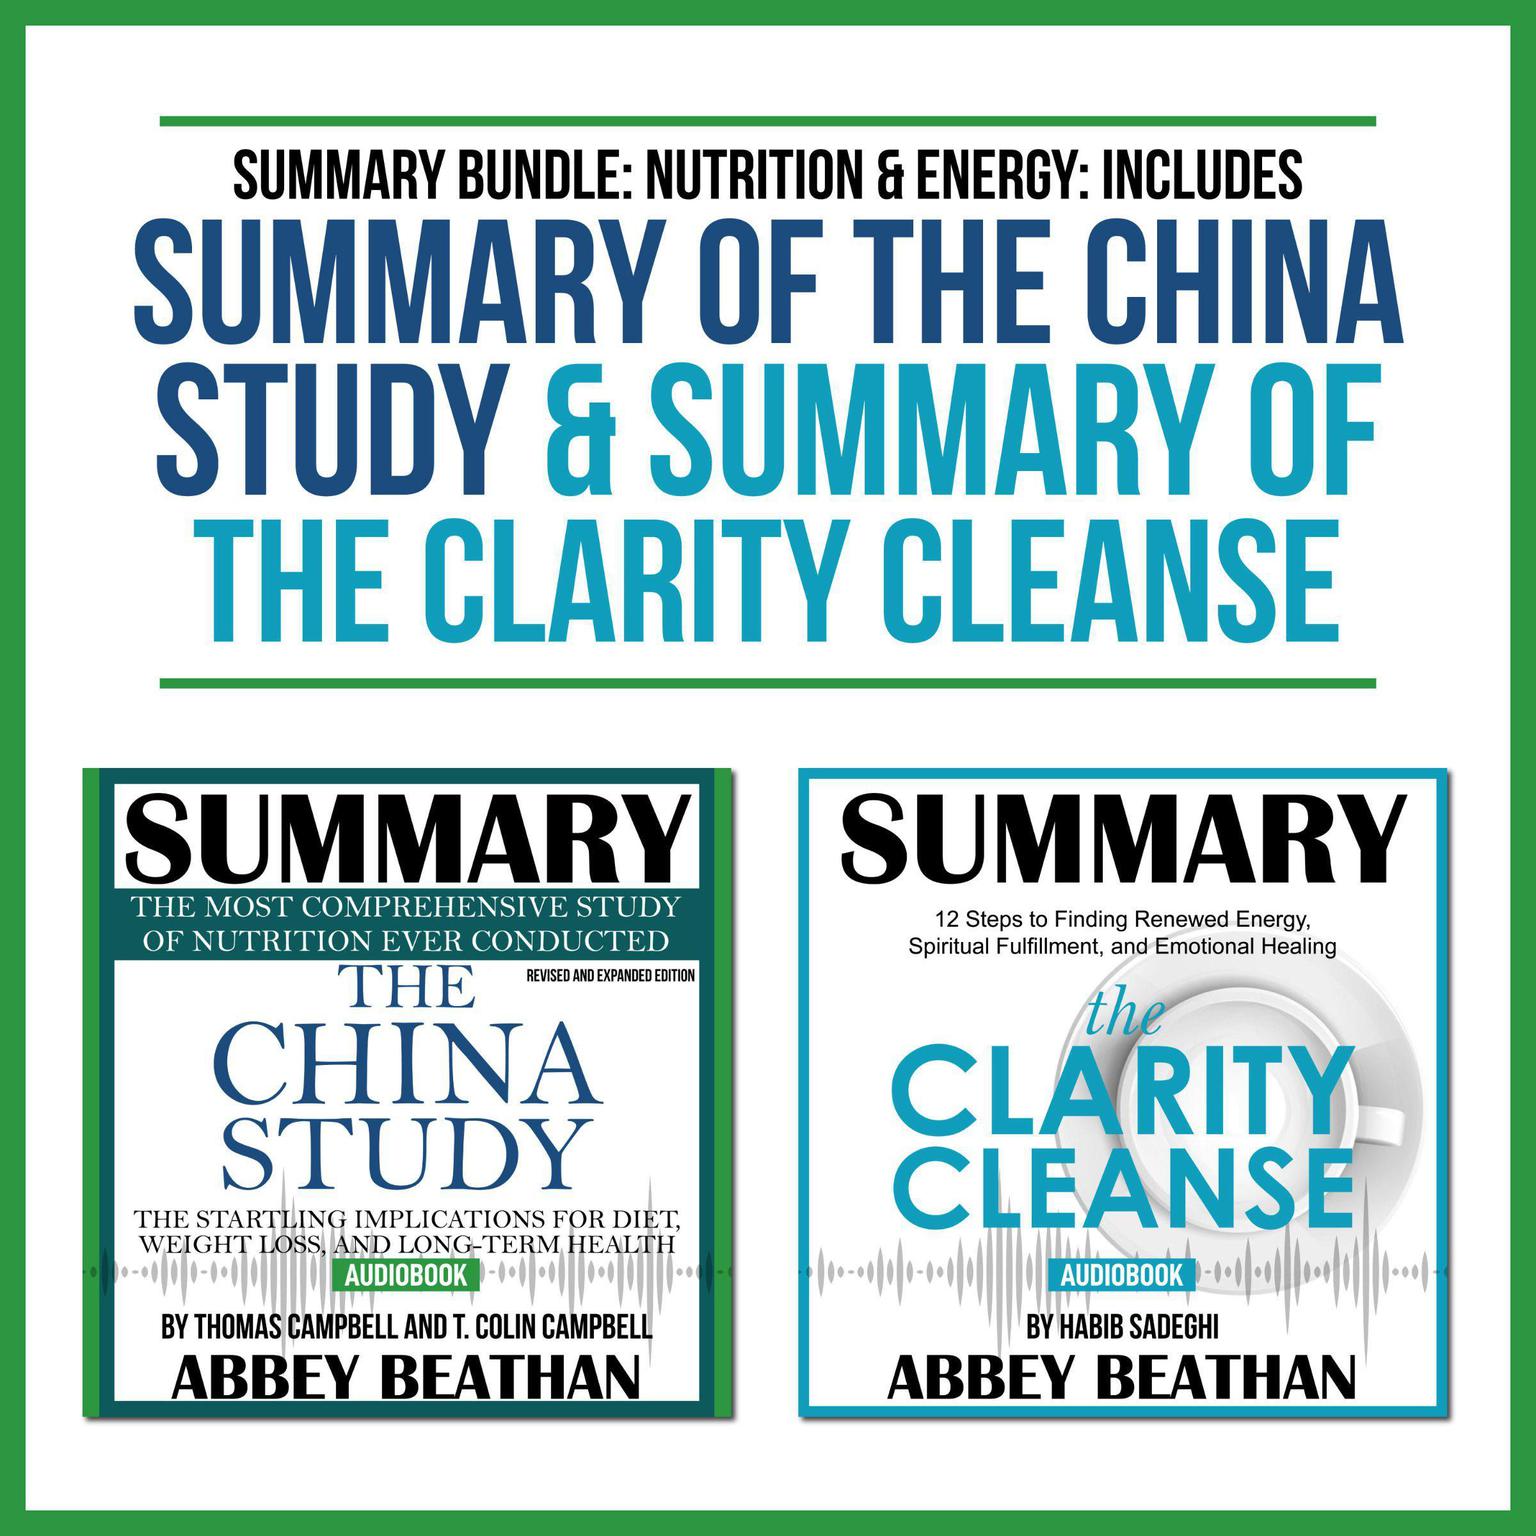 Summary Bundle: Nutrition & Energy: Includes Summary of The China Study & Summary of The Clarity Cleanse Audiobook, by Abbey Beathan